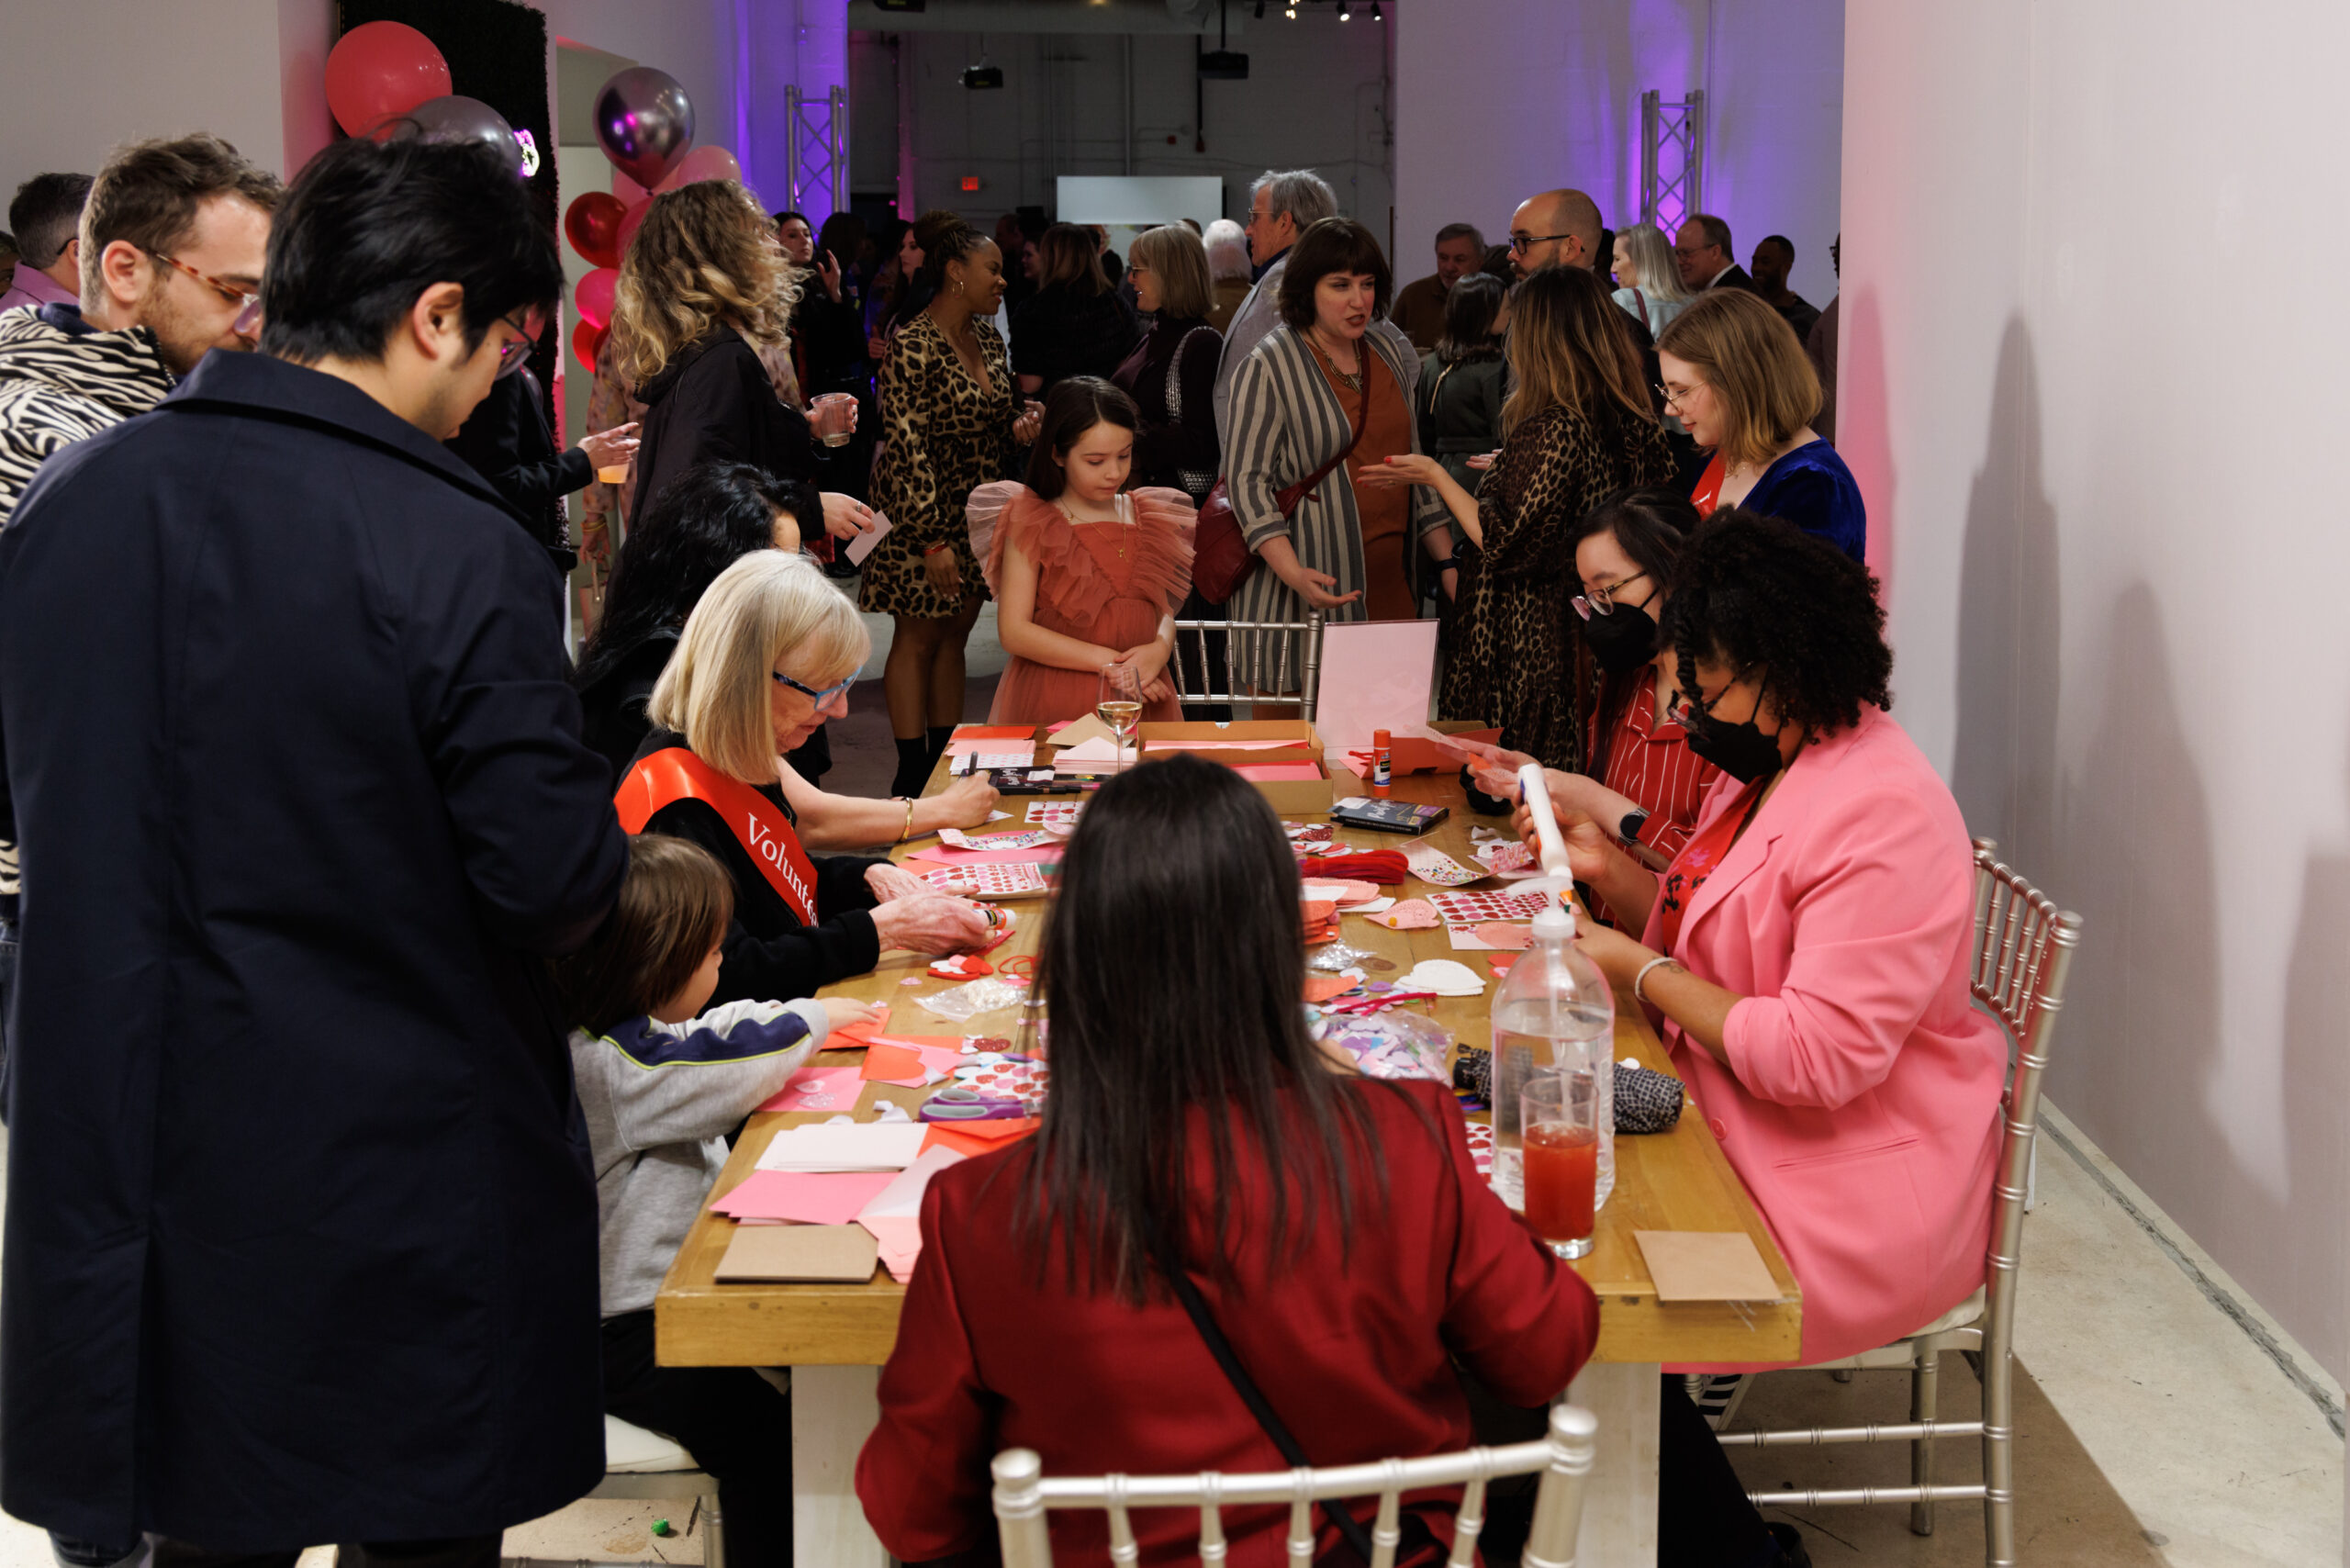 Image of several people sitting at a table with many pieces of pink, red, and white paper in front of them. In the background is a large group of people.